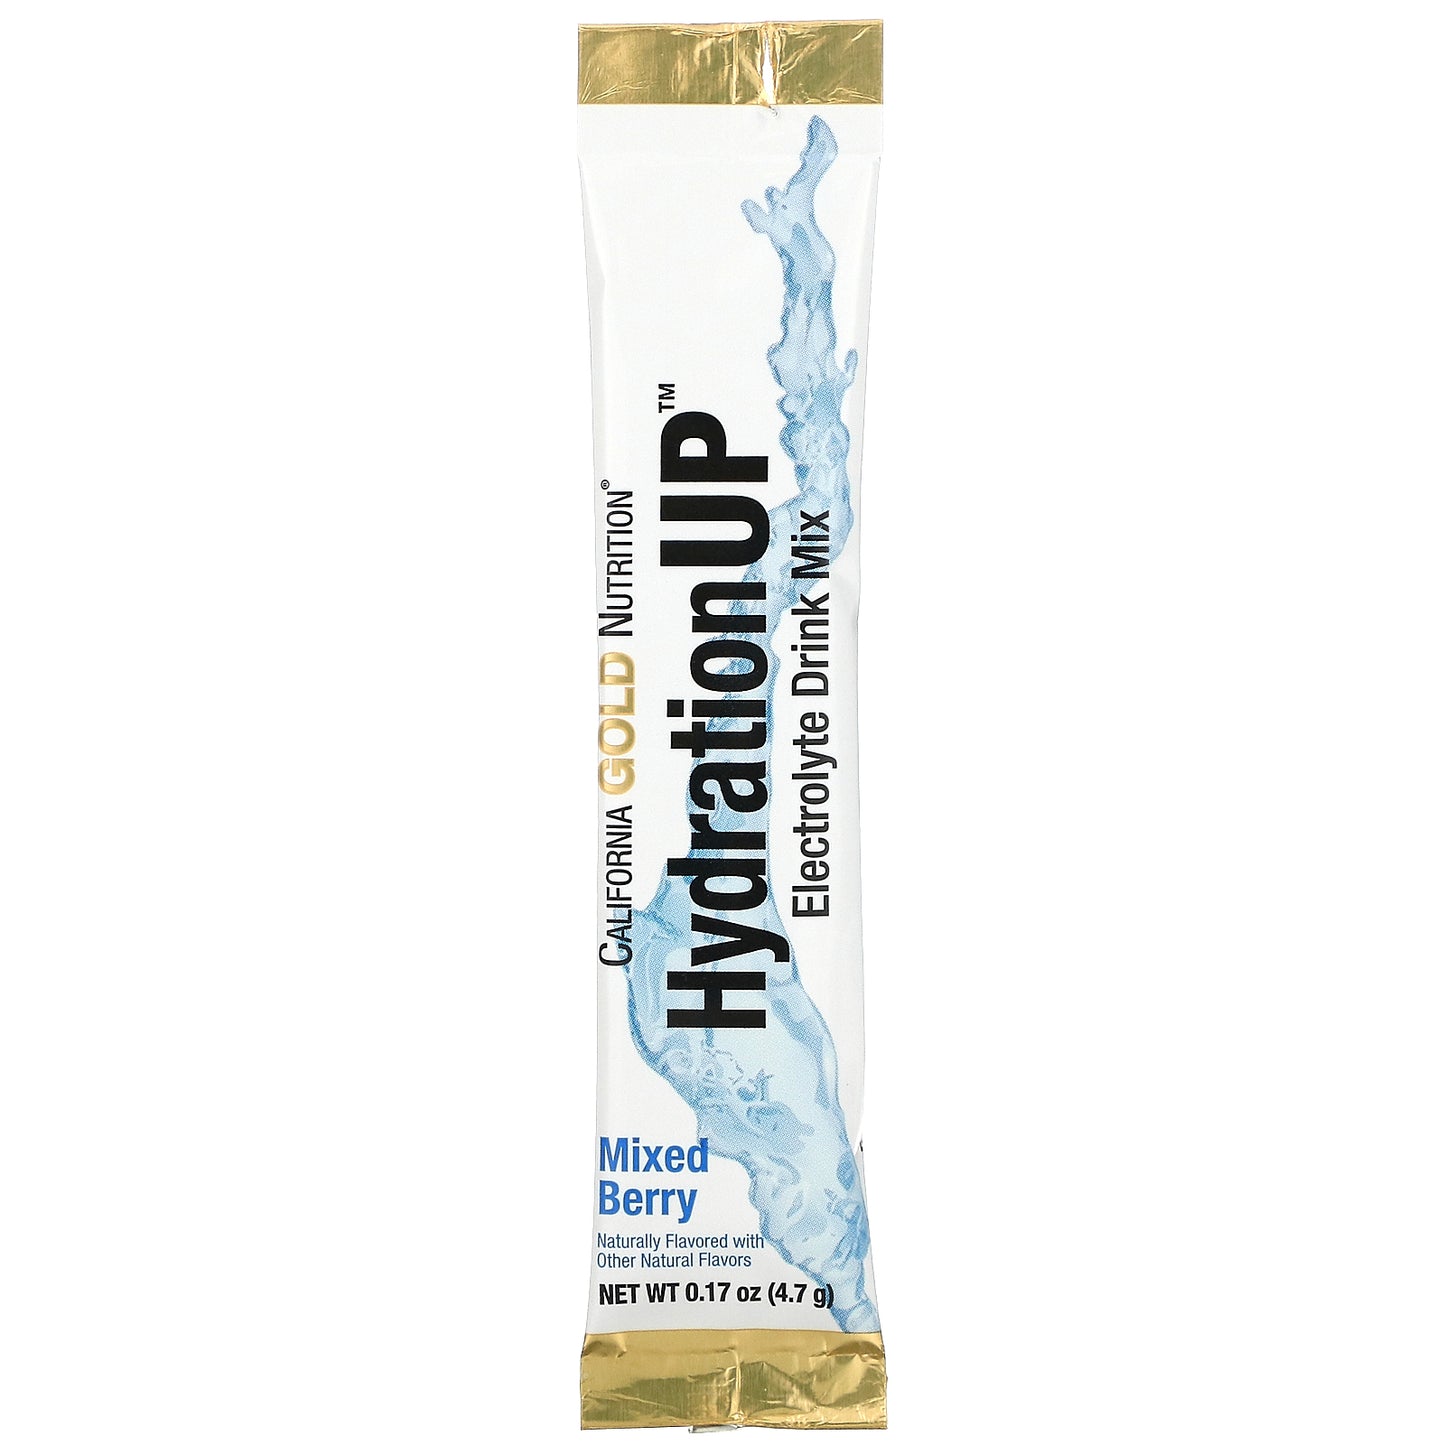 California Gold Nutrition, HydrationUP, Electrolyte Drink Mix, Mixed Berry, 20 Packets, 0.17 oz (4.7 g) Each